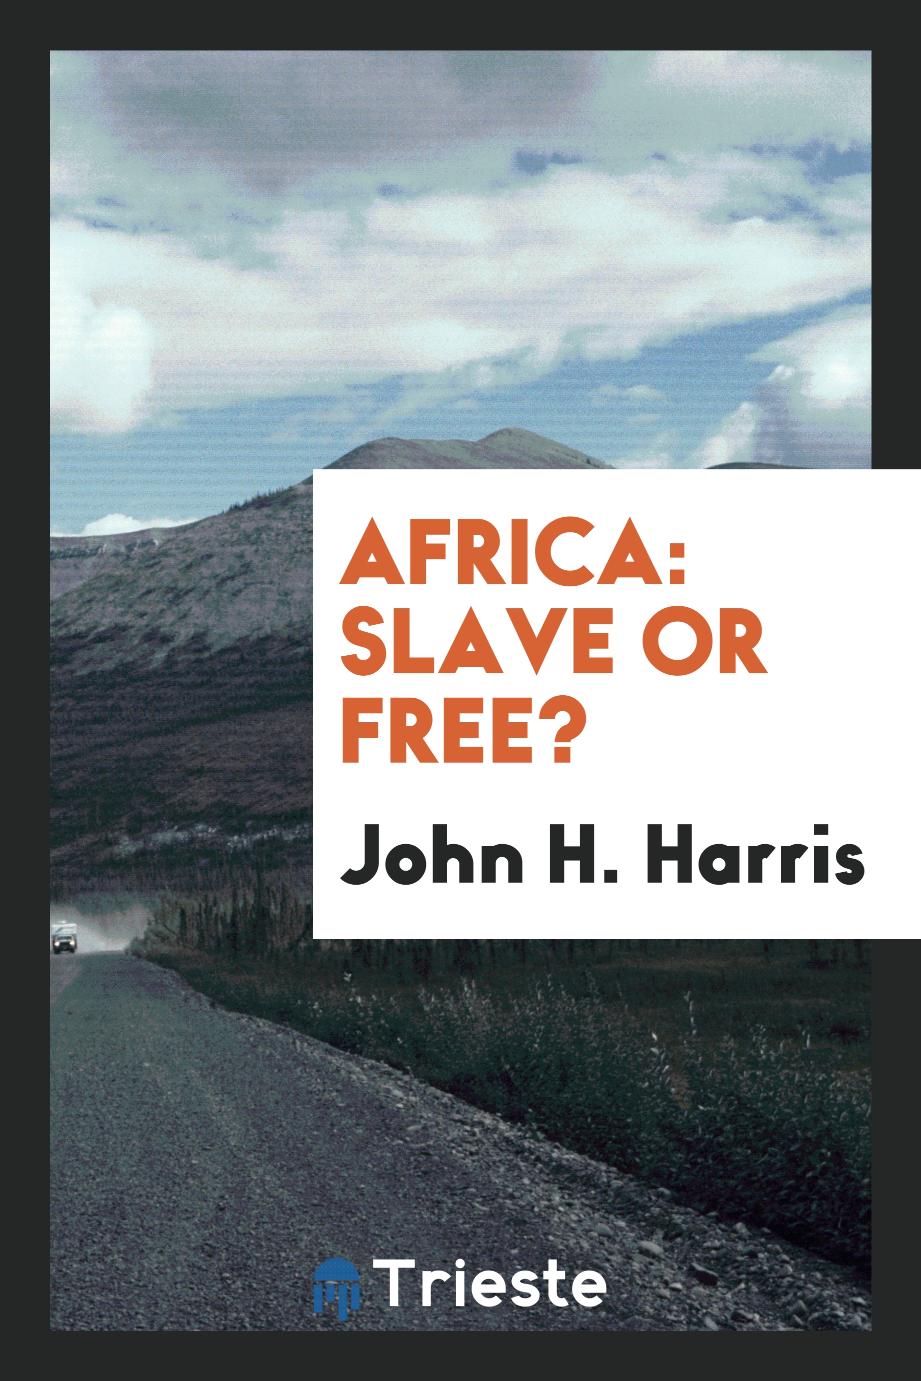 Africa: slave or free?